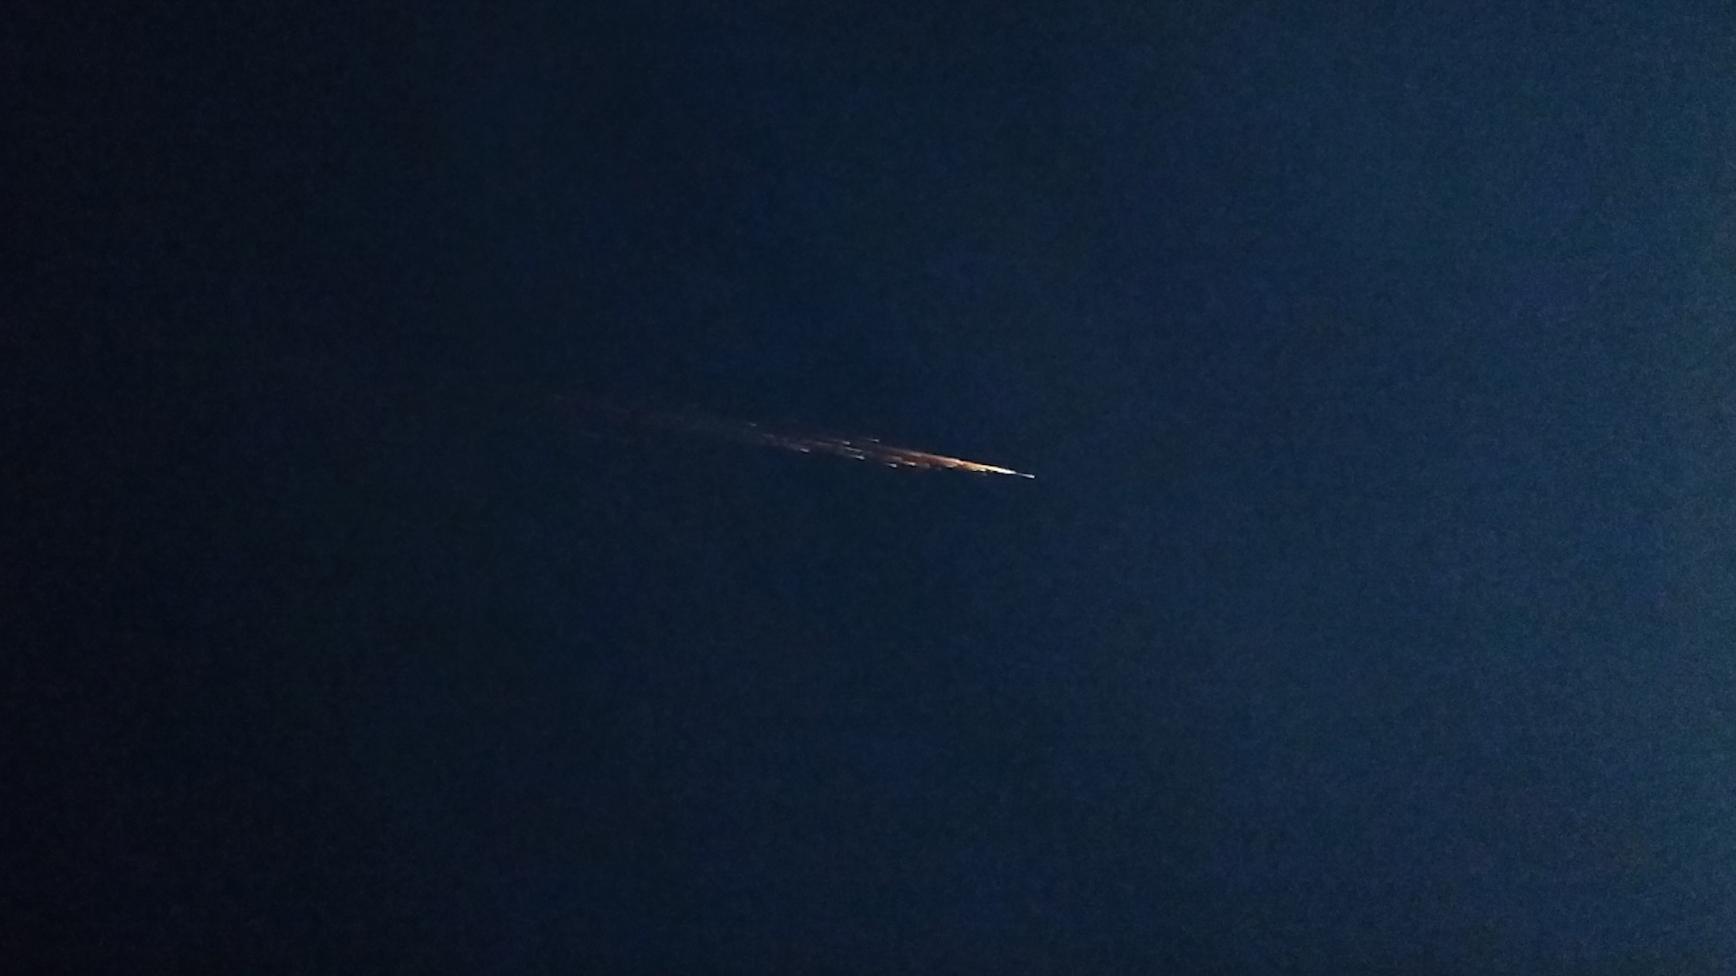 Chinese space junk falls to Earth over Southern California, creating spectacular fireball (photos, video)